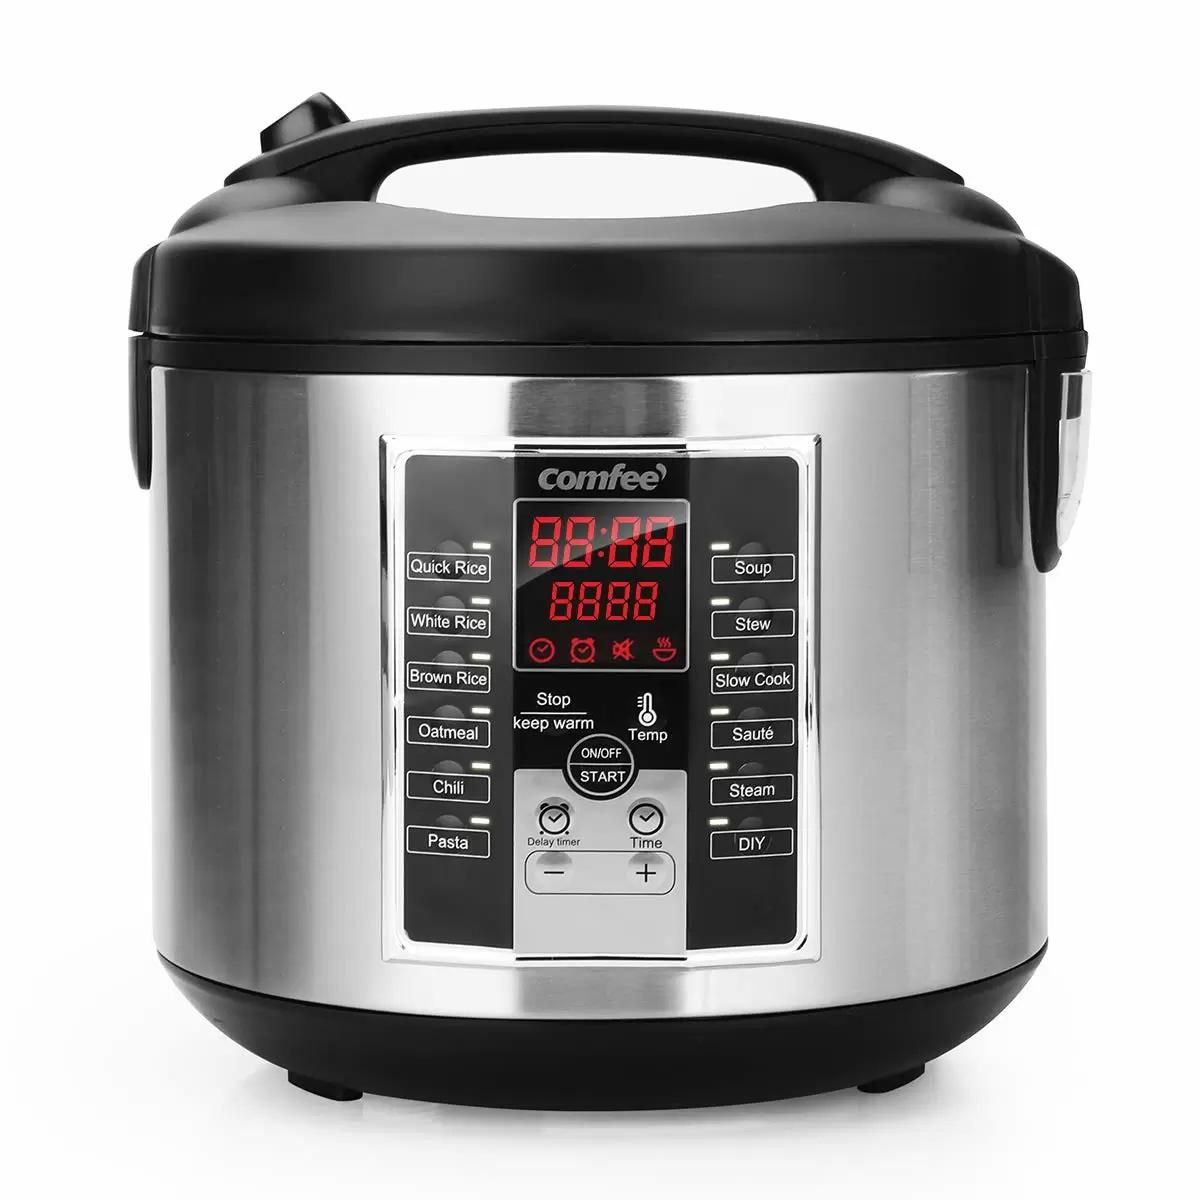 Comfee Rice Cooker and Slow Cooker for $29.99 Shipped